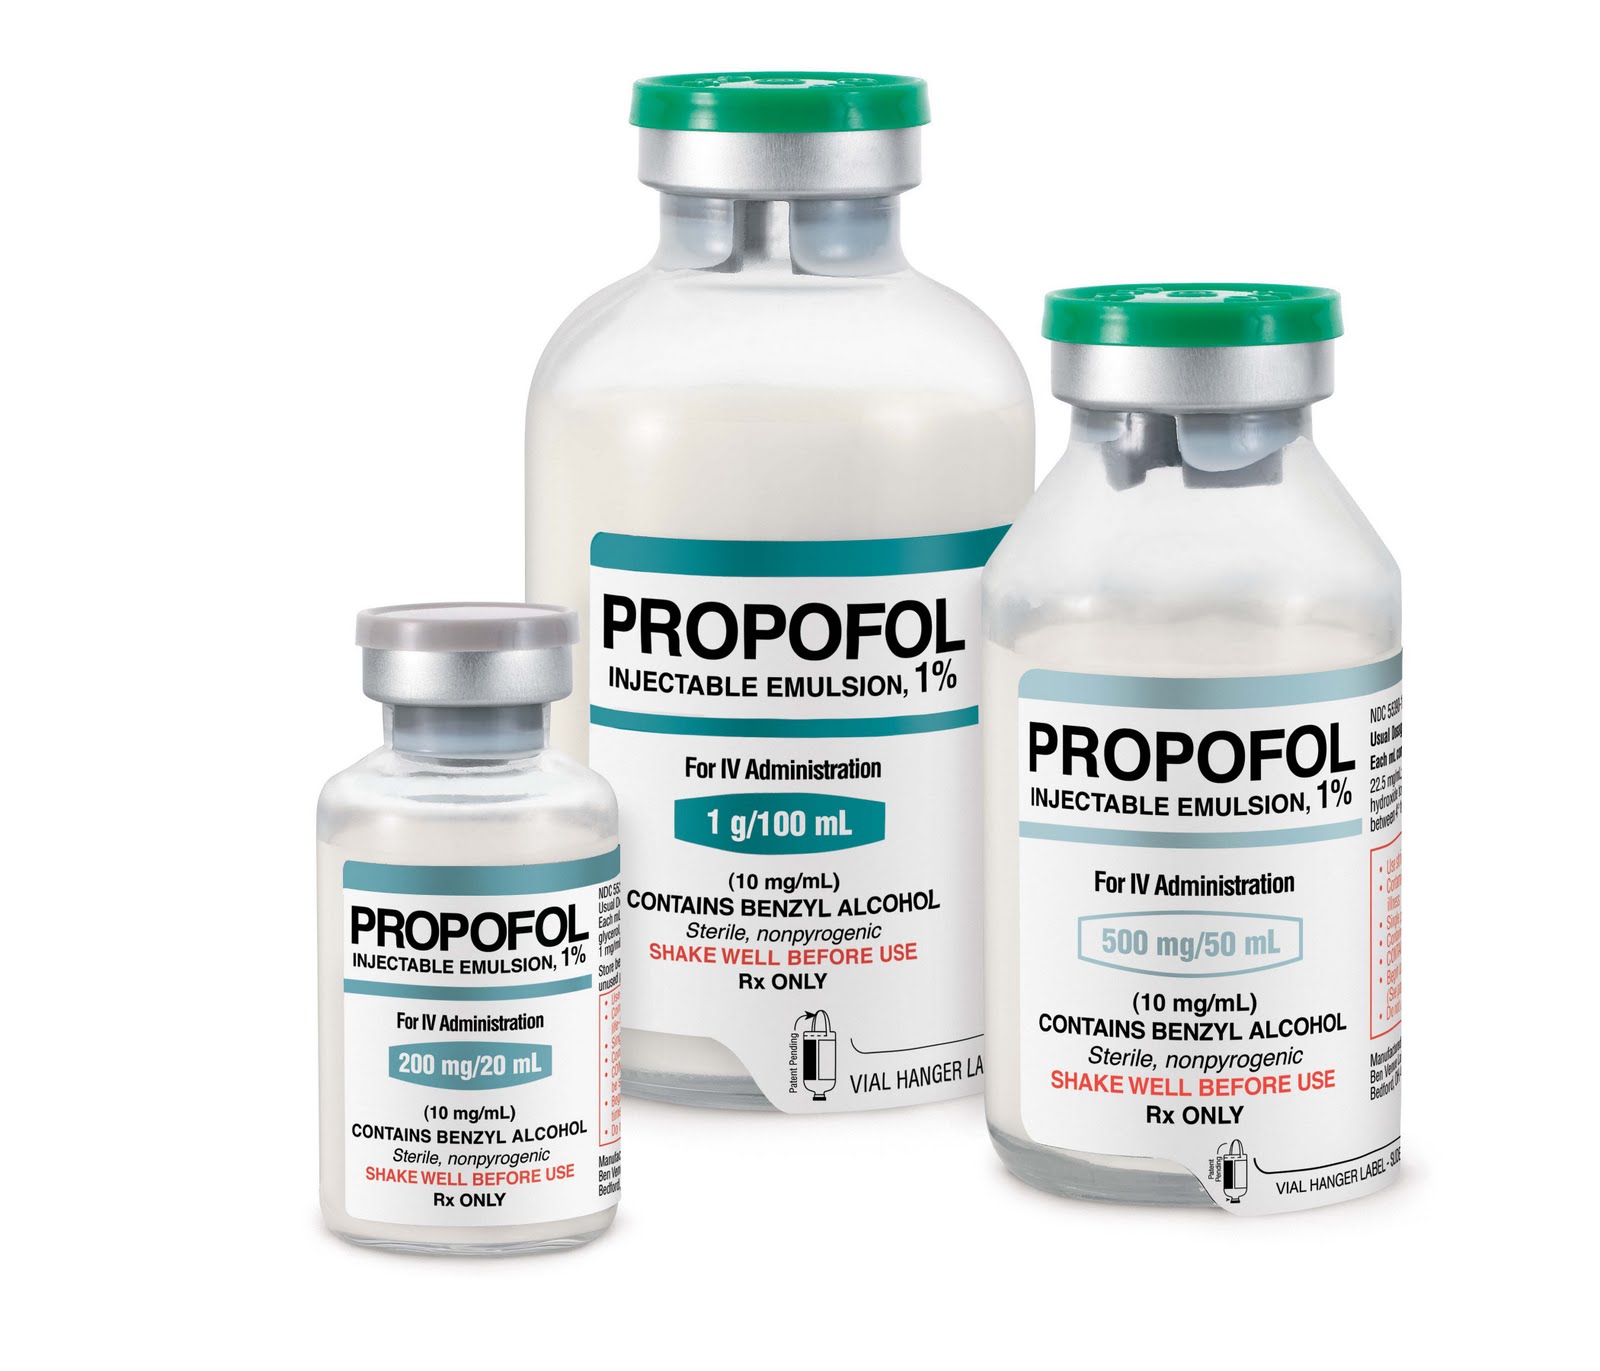 My Anesthesia Notes: PROPOFOL